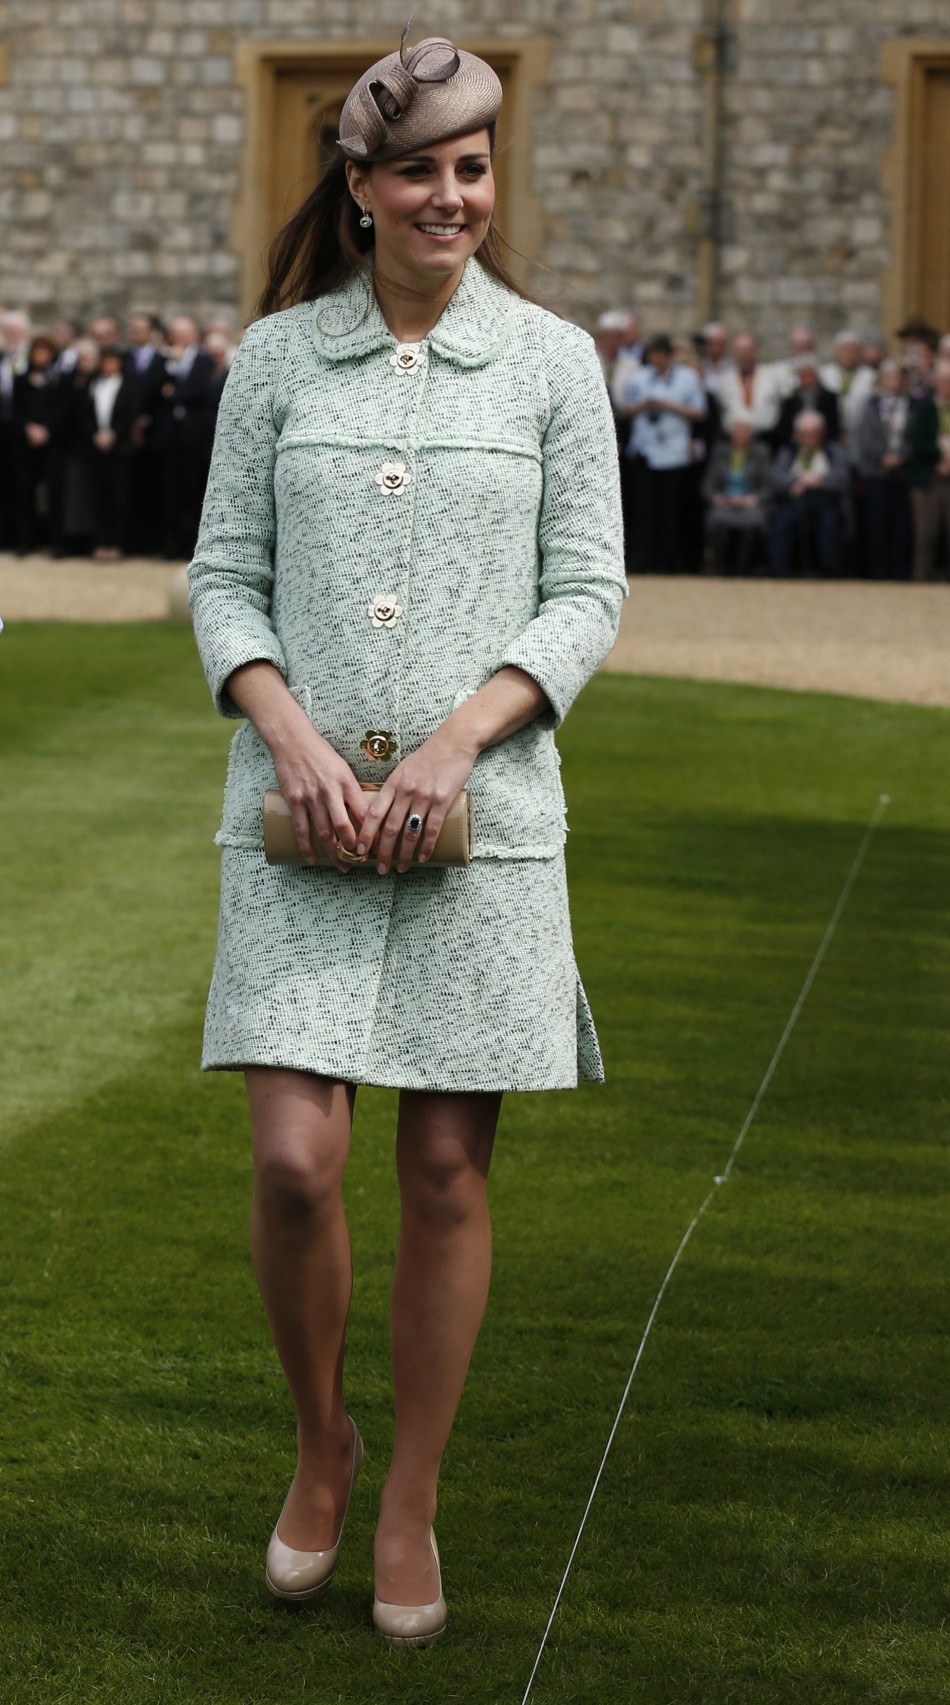 Britains Catherine, Duchess of Cambridge, showing visible signs of pregnancy, meets scouts during at the National Review of Queens Scouts at Windsor Castle in Berkshire, near London April 21, 2013.